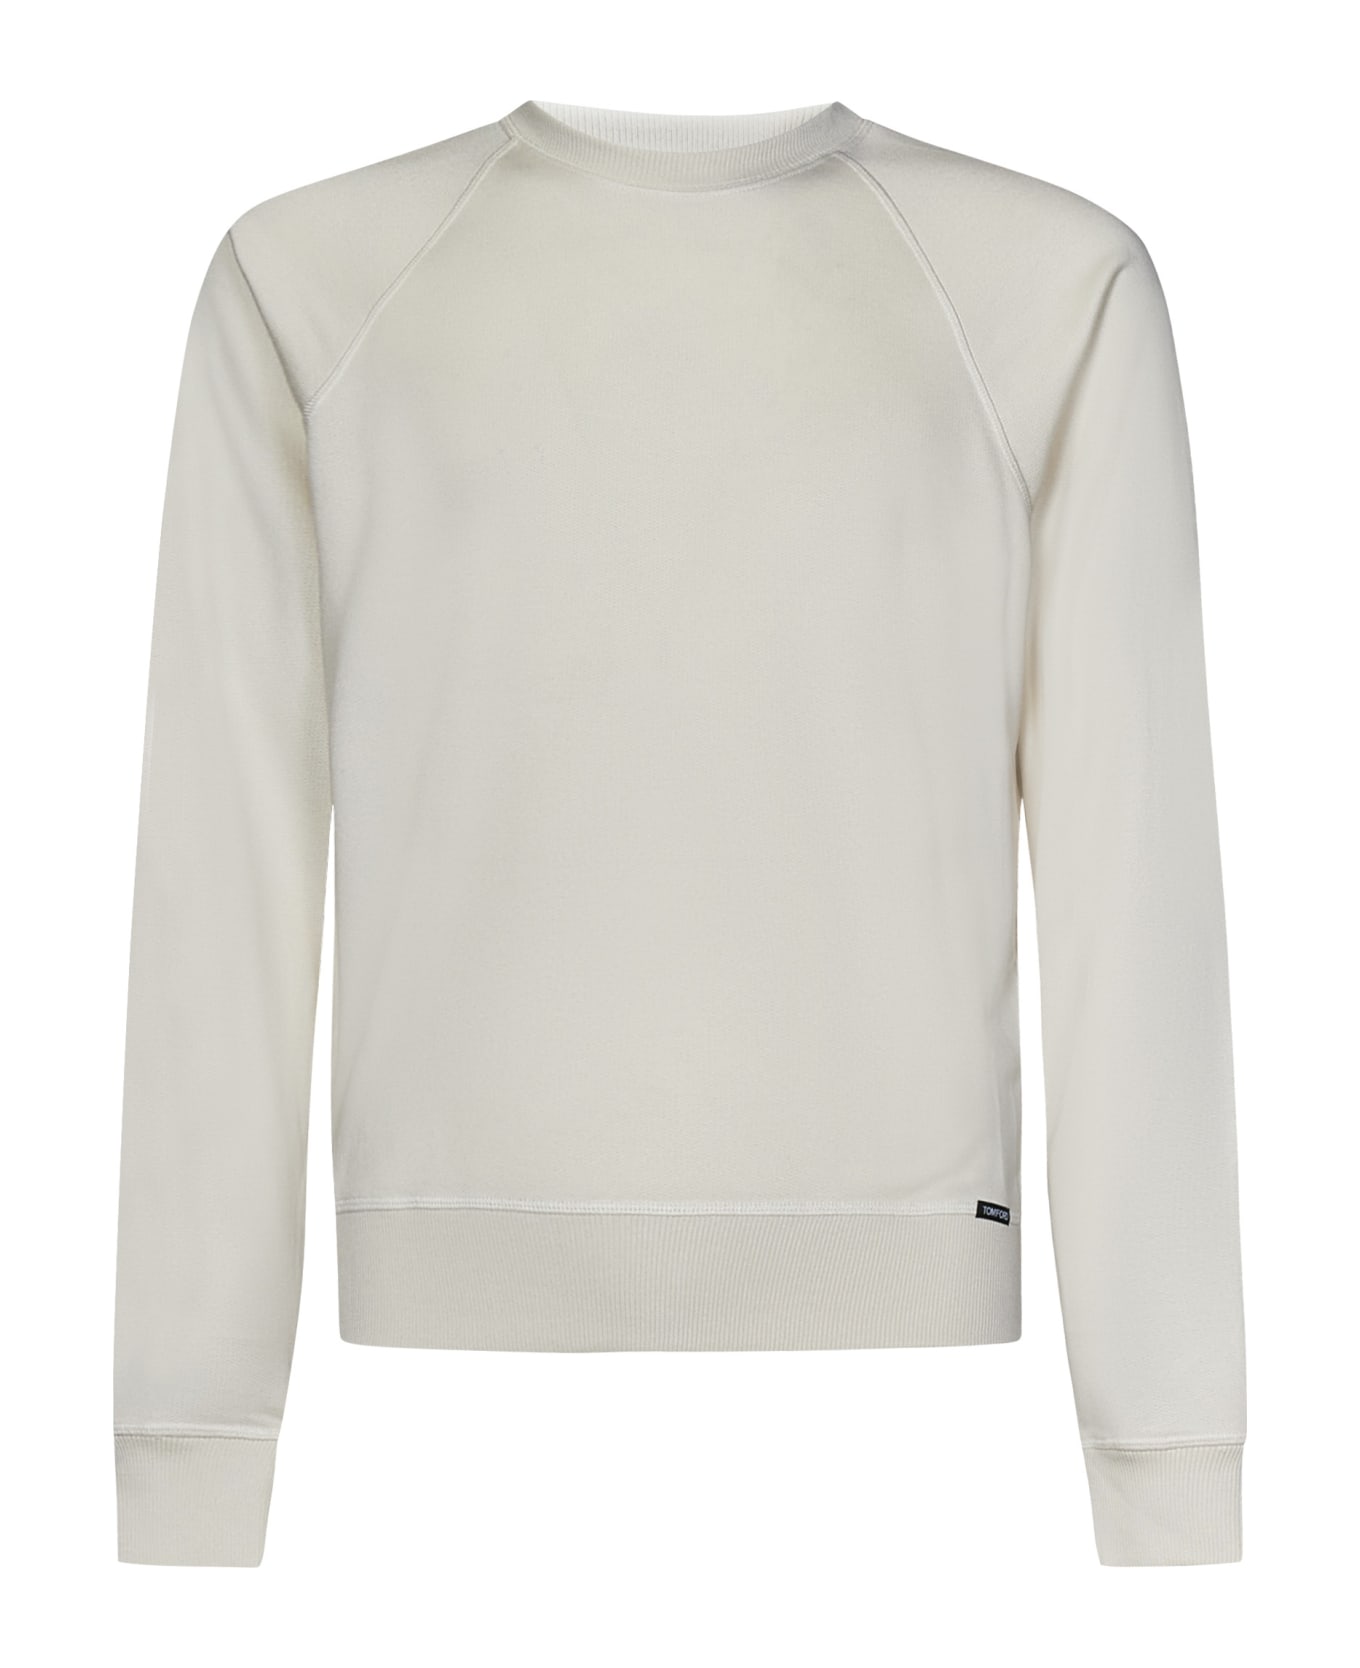 Tom Ford Sweater - Ivory